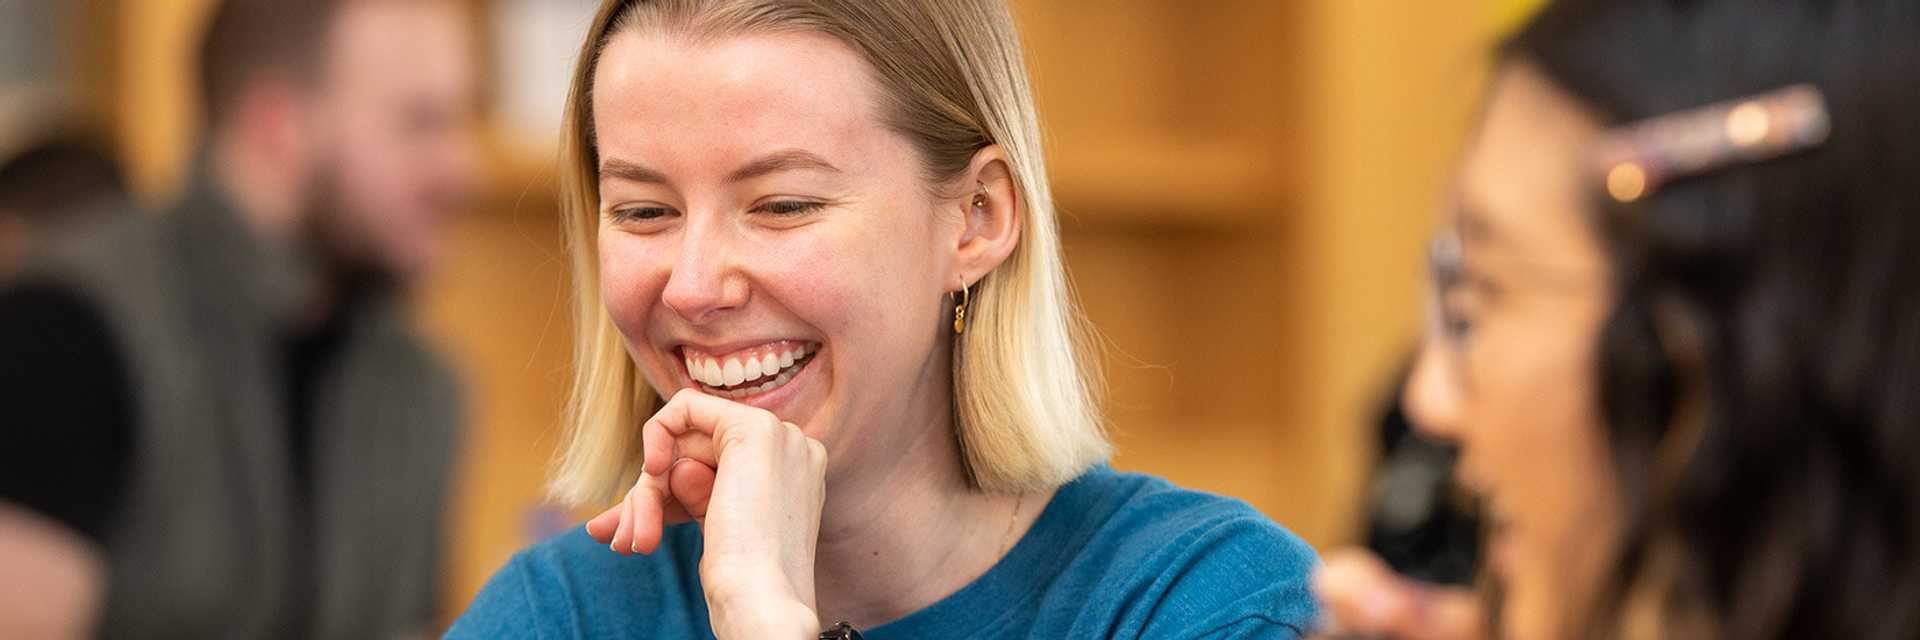 Close-up photo of a Case Western Reserve University student smiling in class